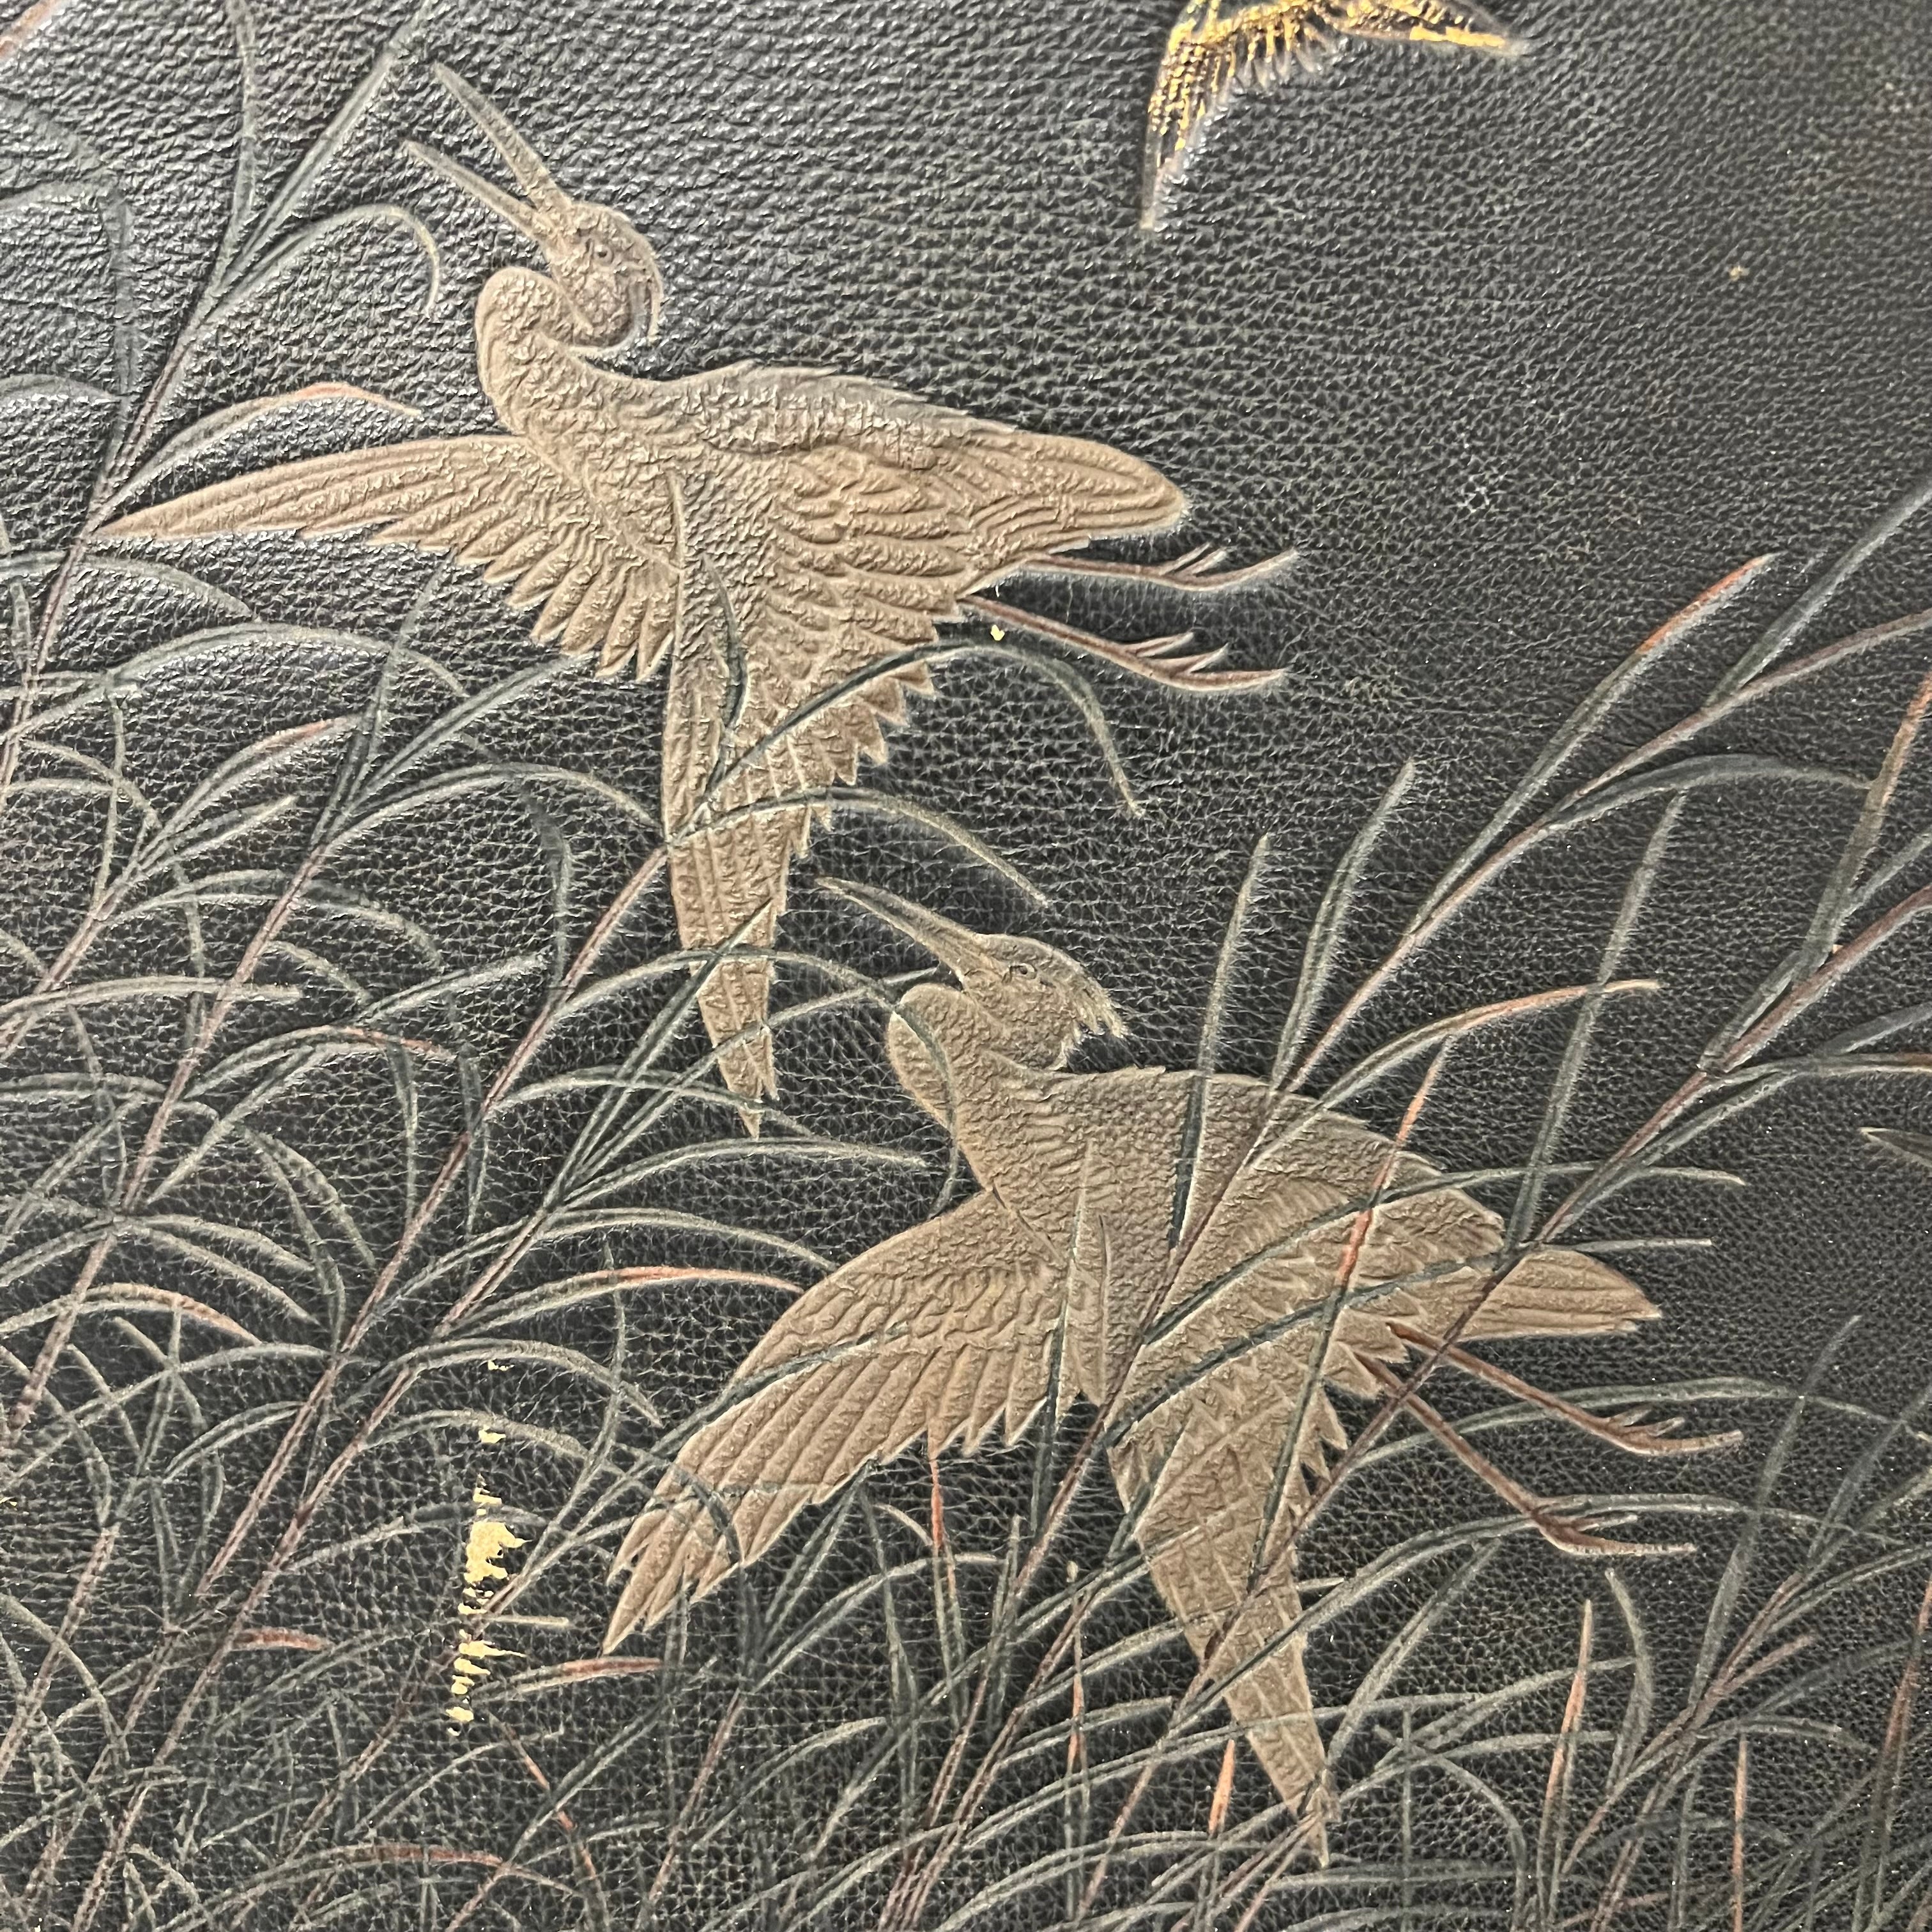 Antique Leather Artwork of Hawk and Birds within Landscape